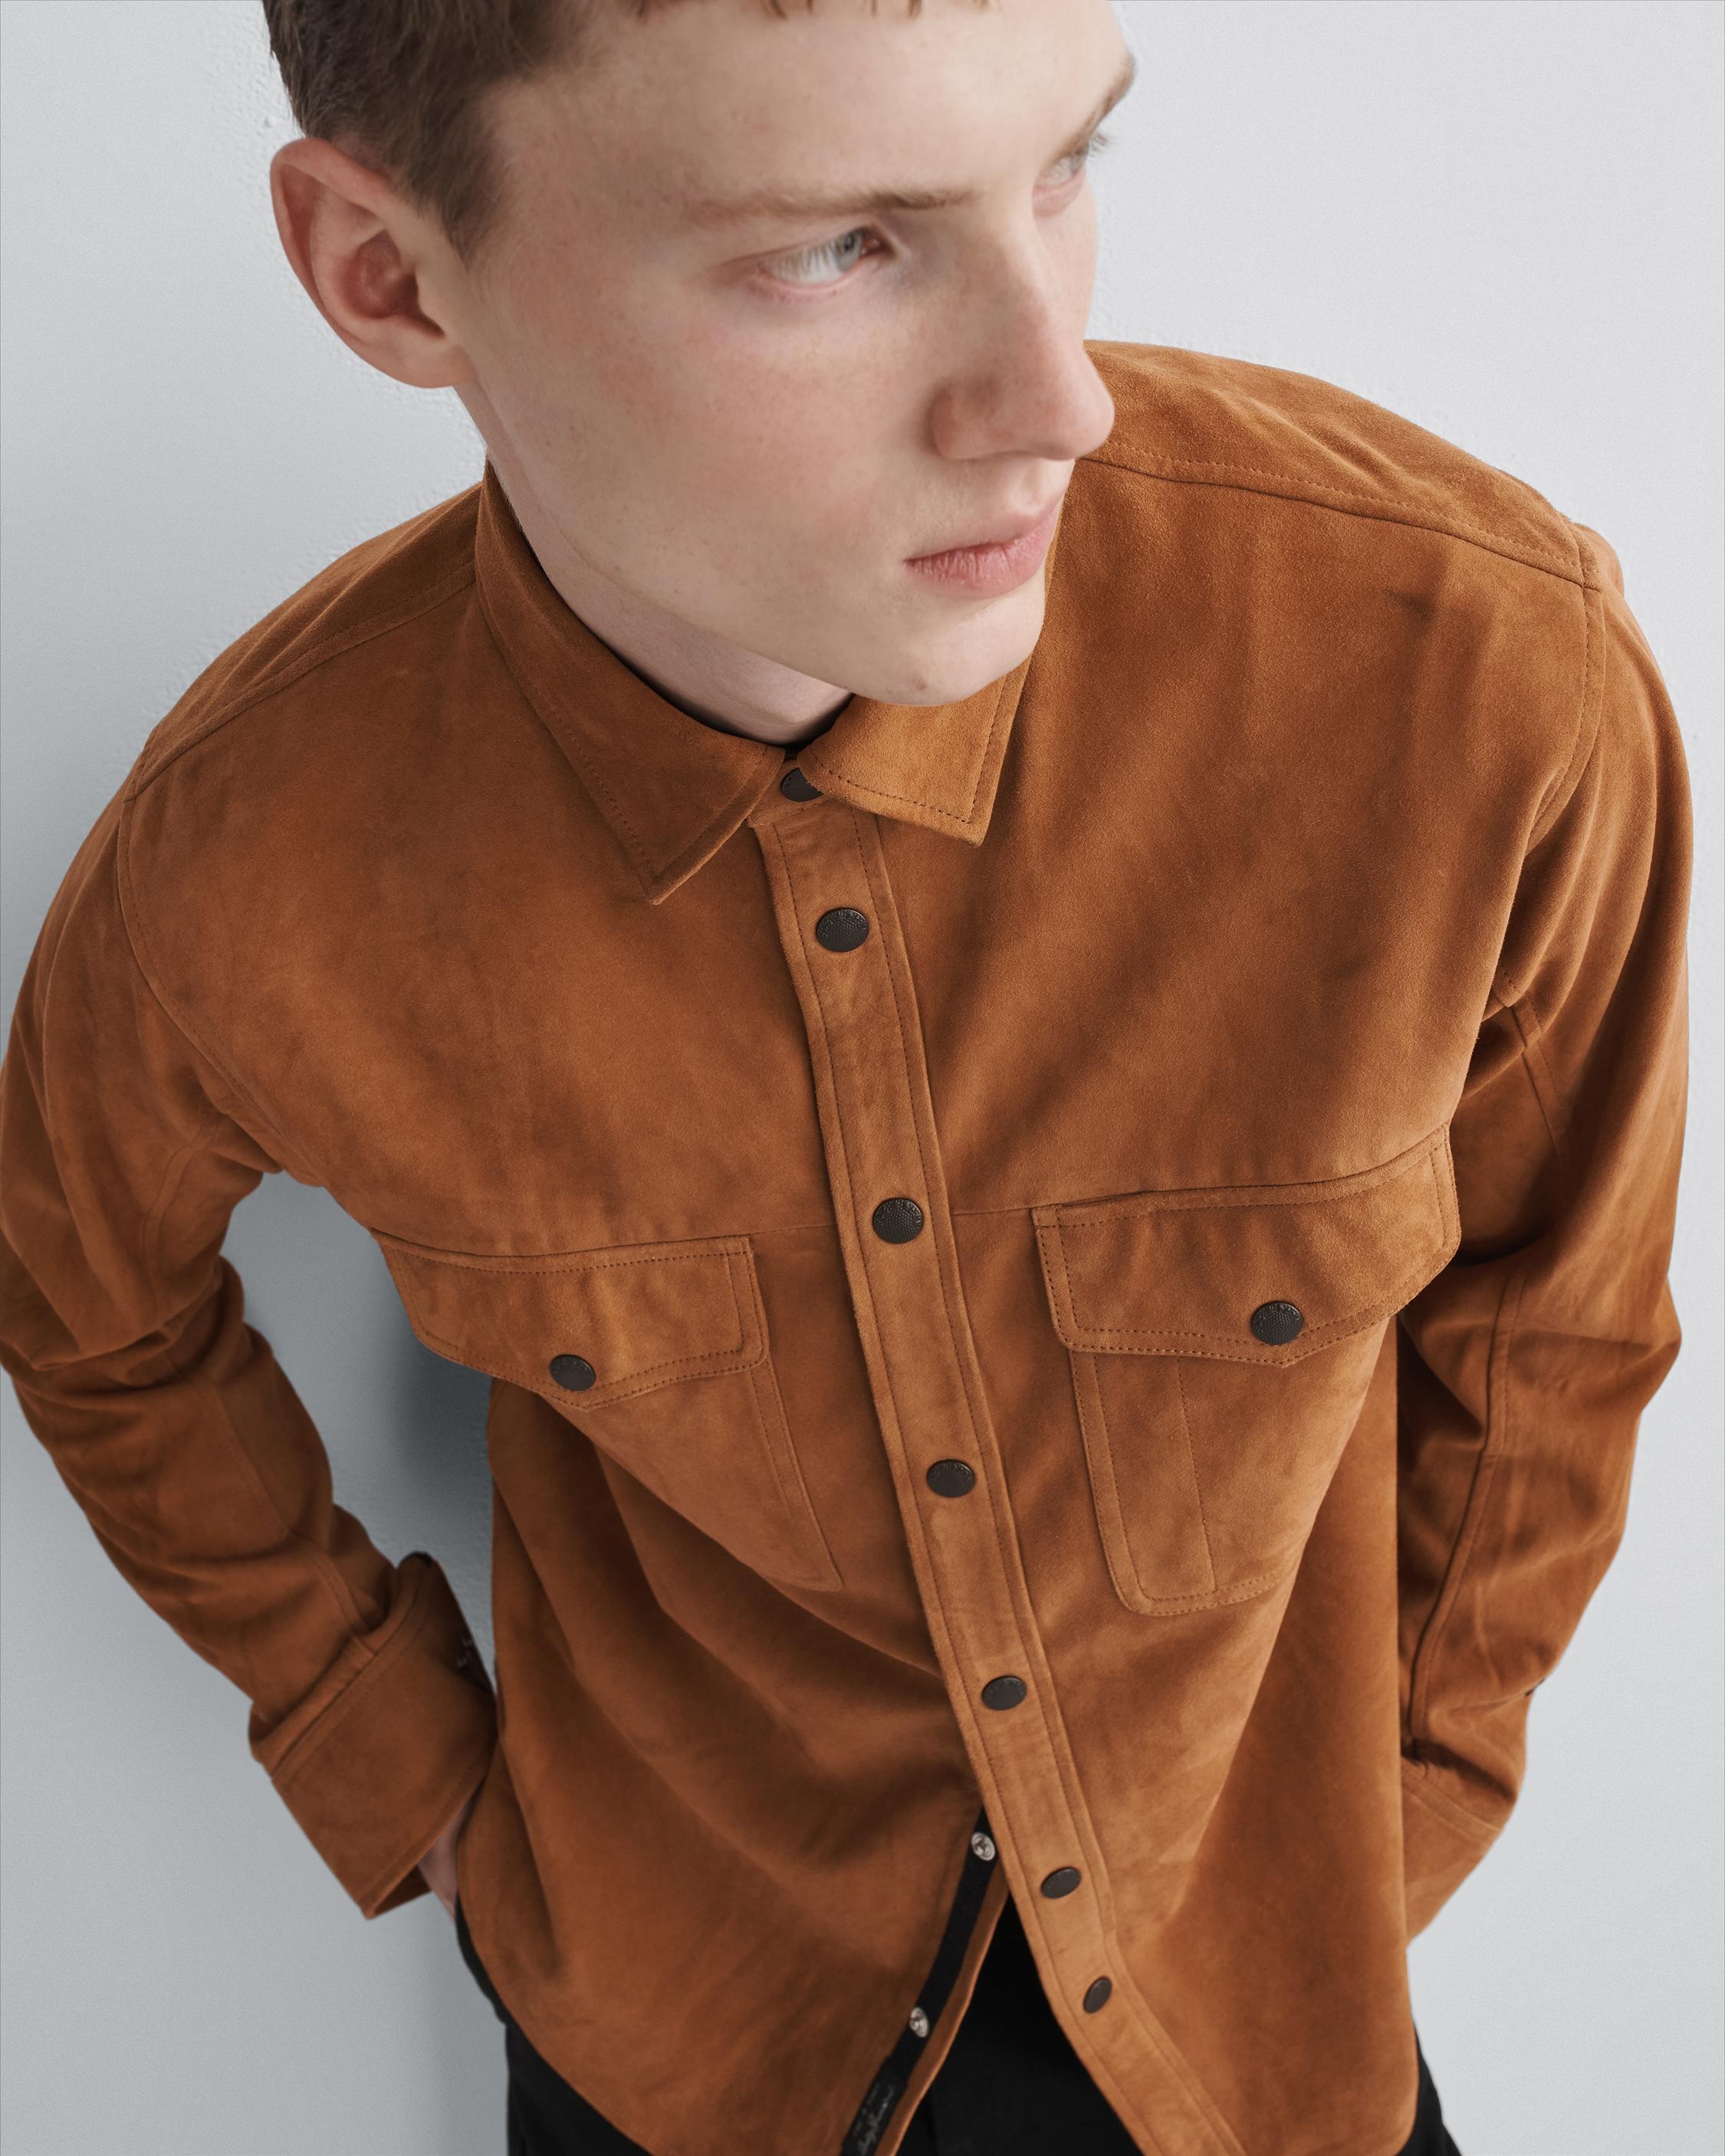 Engineered Jack Suede Shirt
Relaxed Fit Button Down Shirt - 2